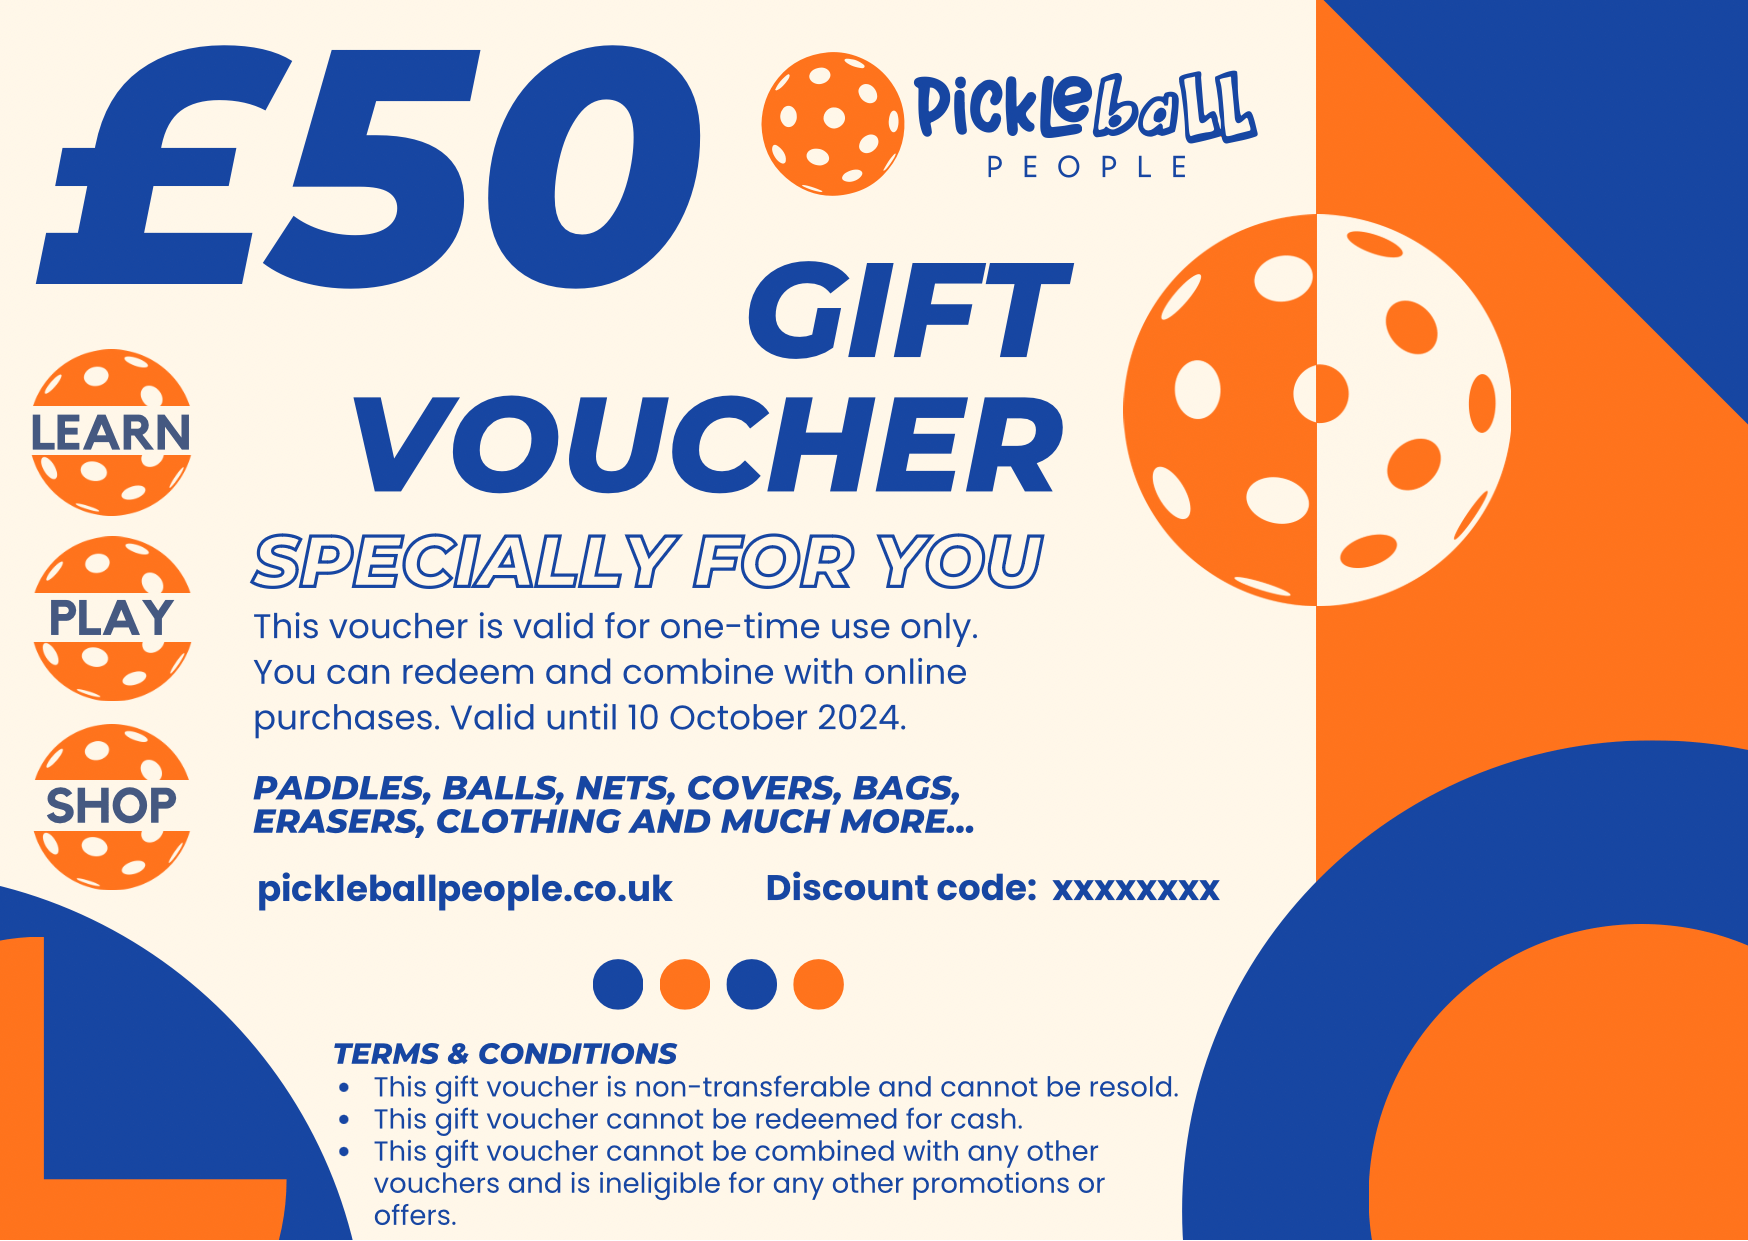 Featured image for “Pickleball People £50 - Gift Voucher”